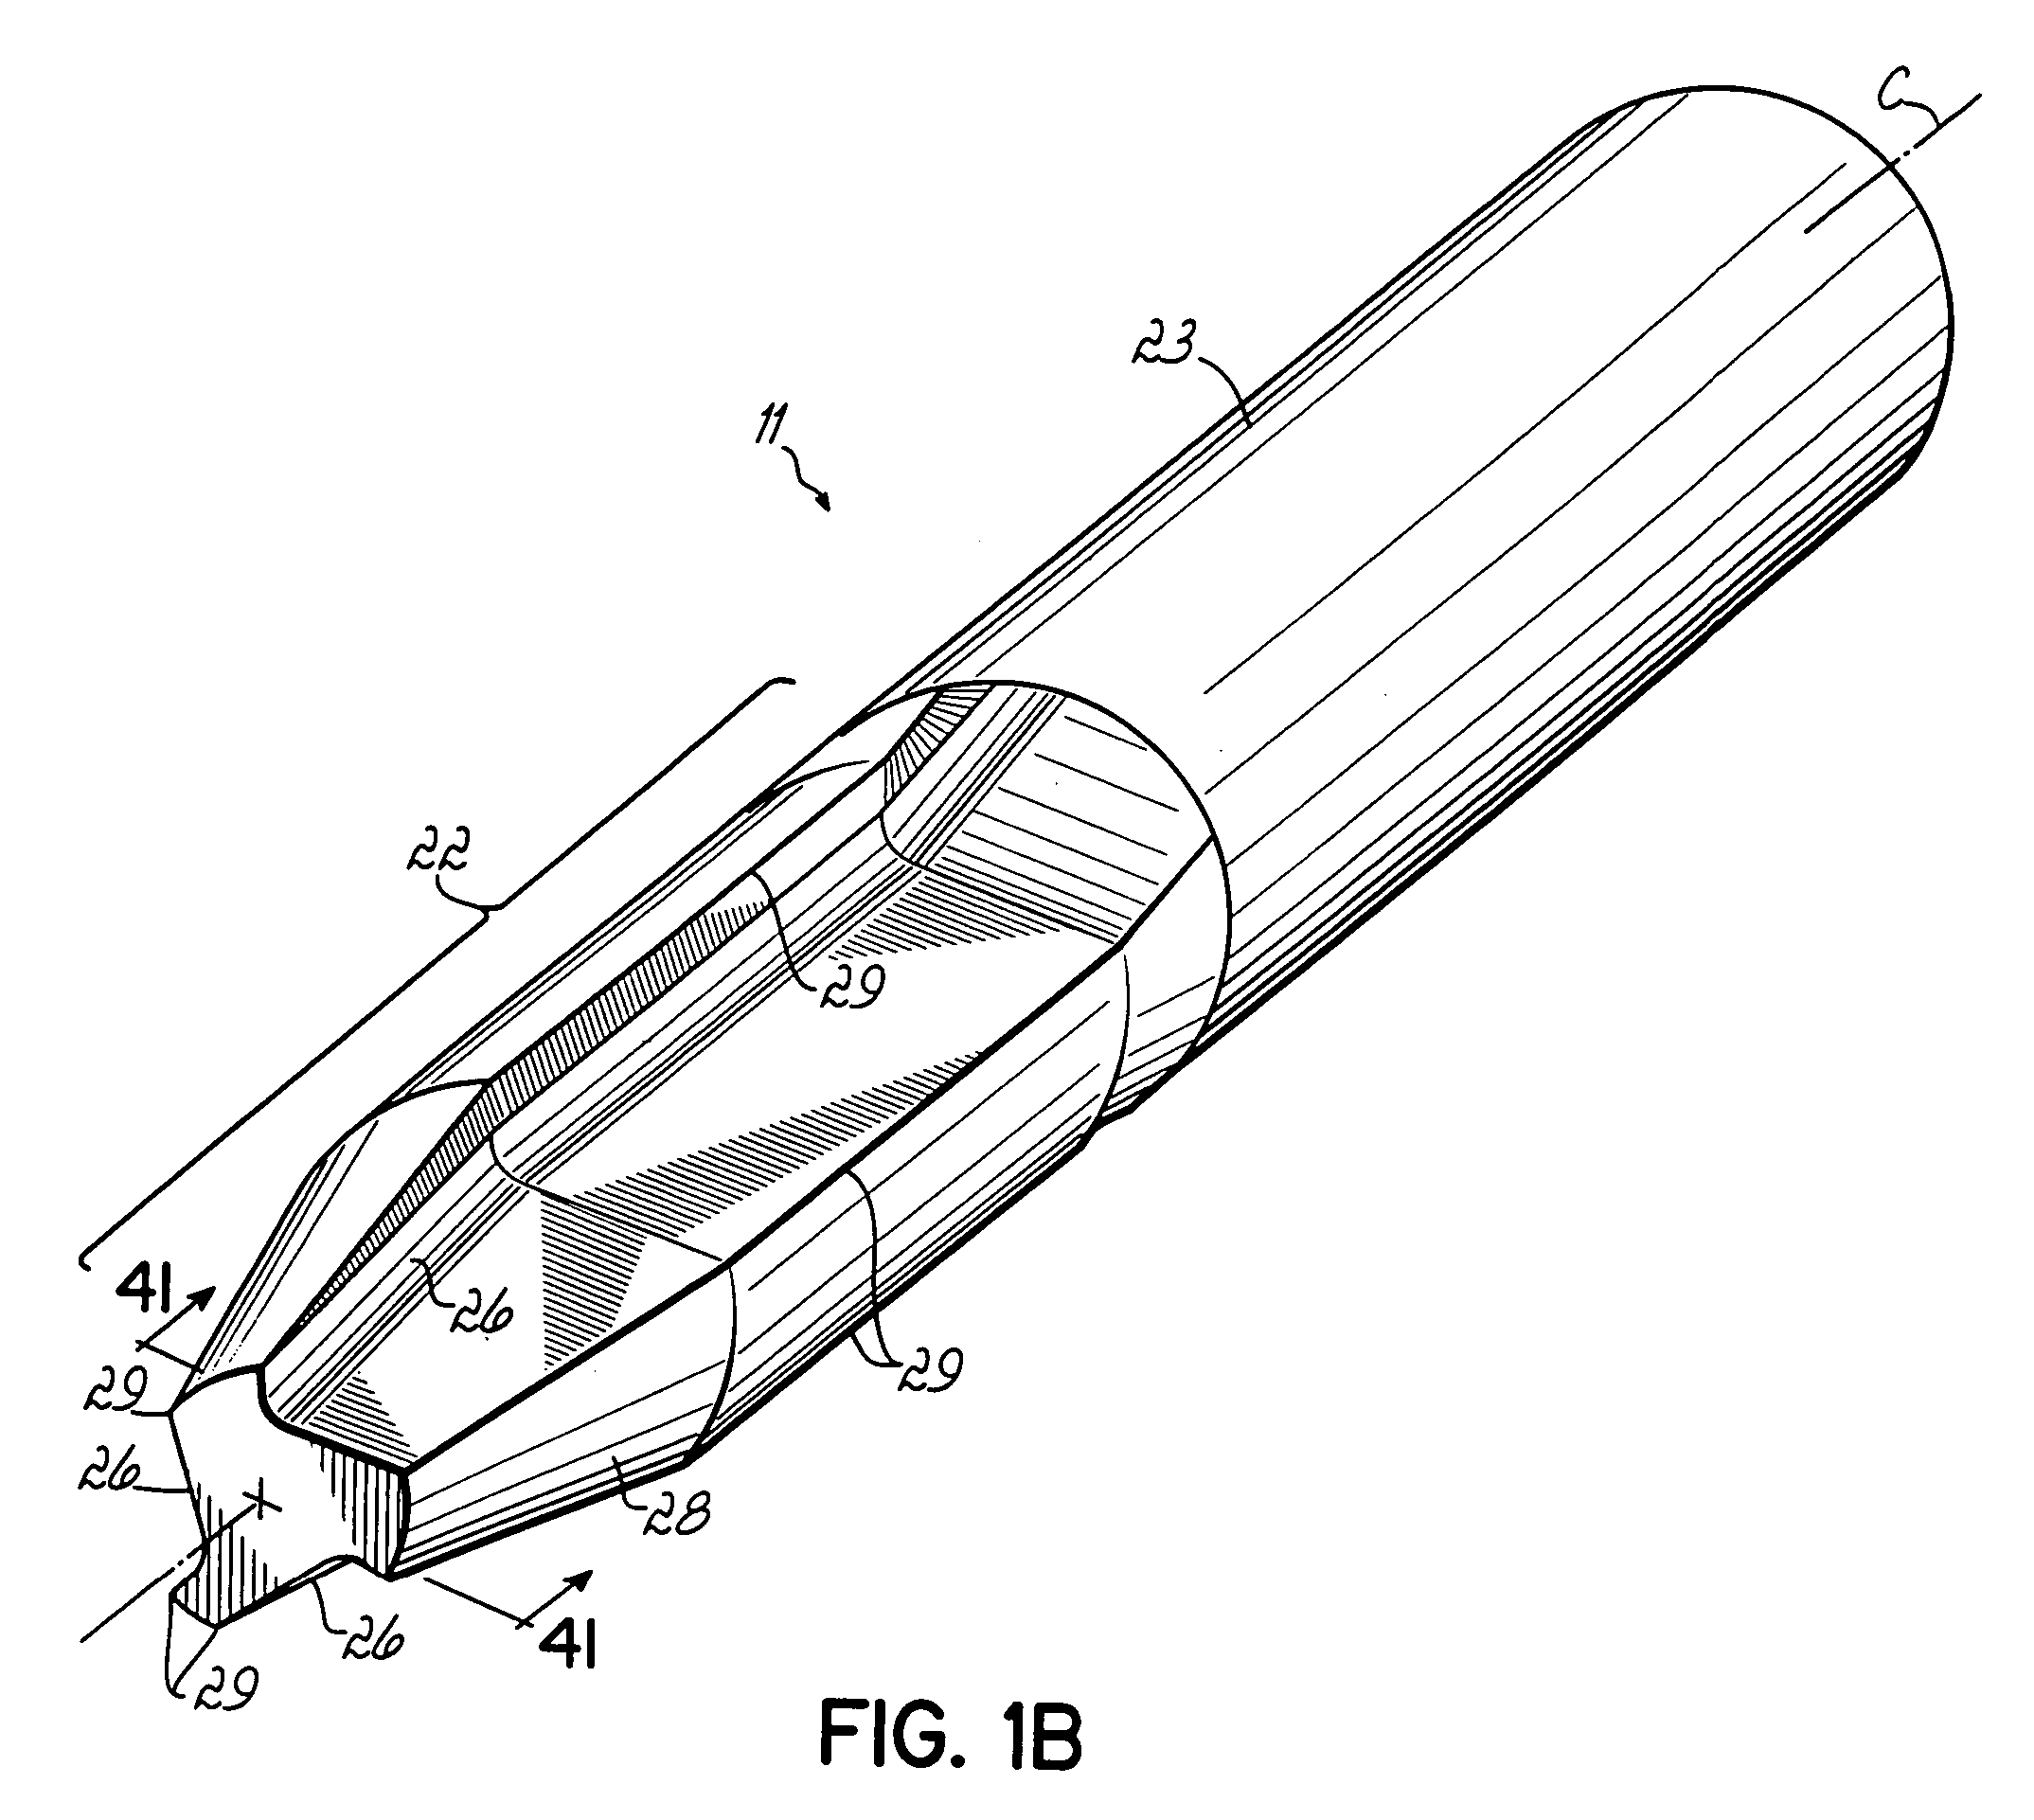 Method of manufacturing an endodontic instrument